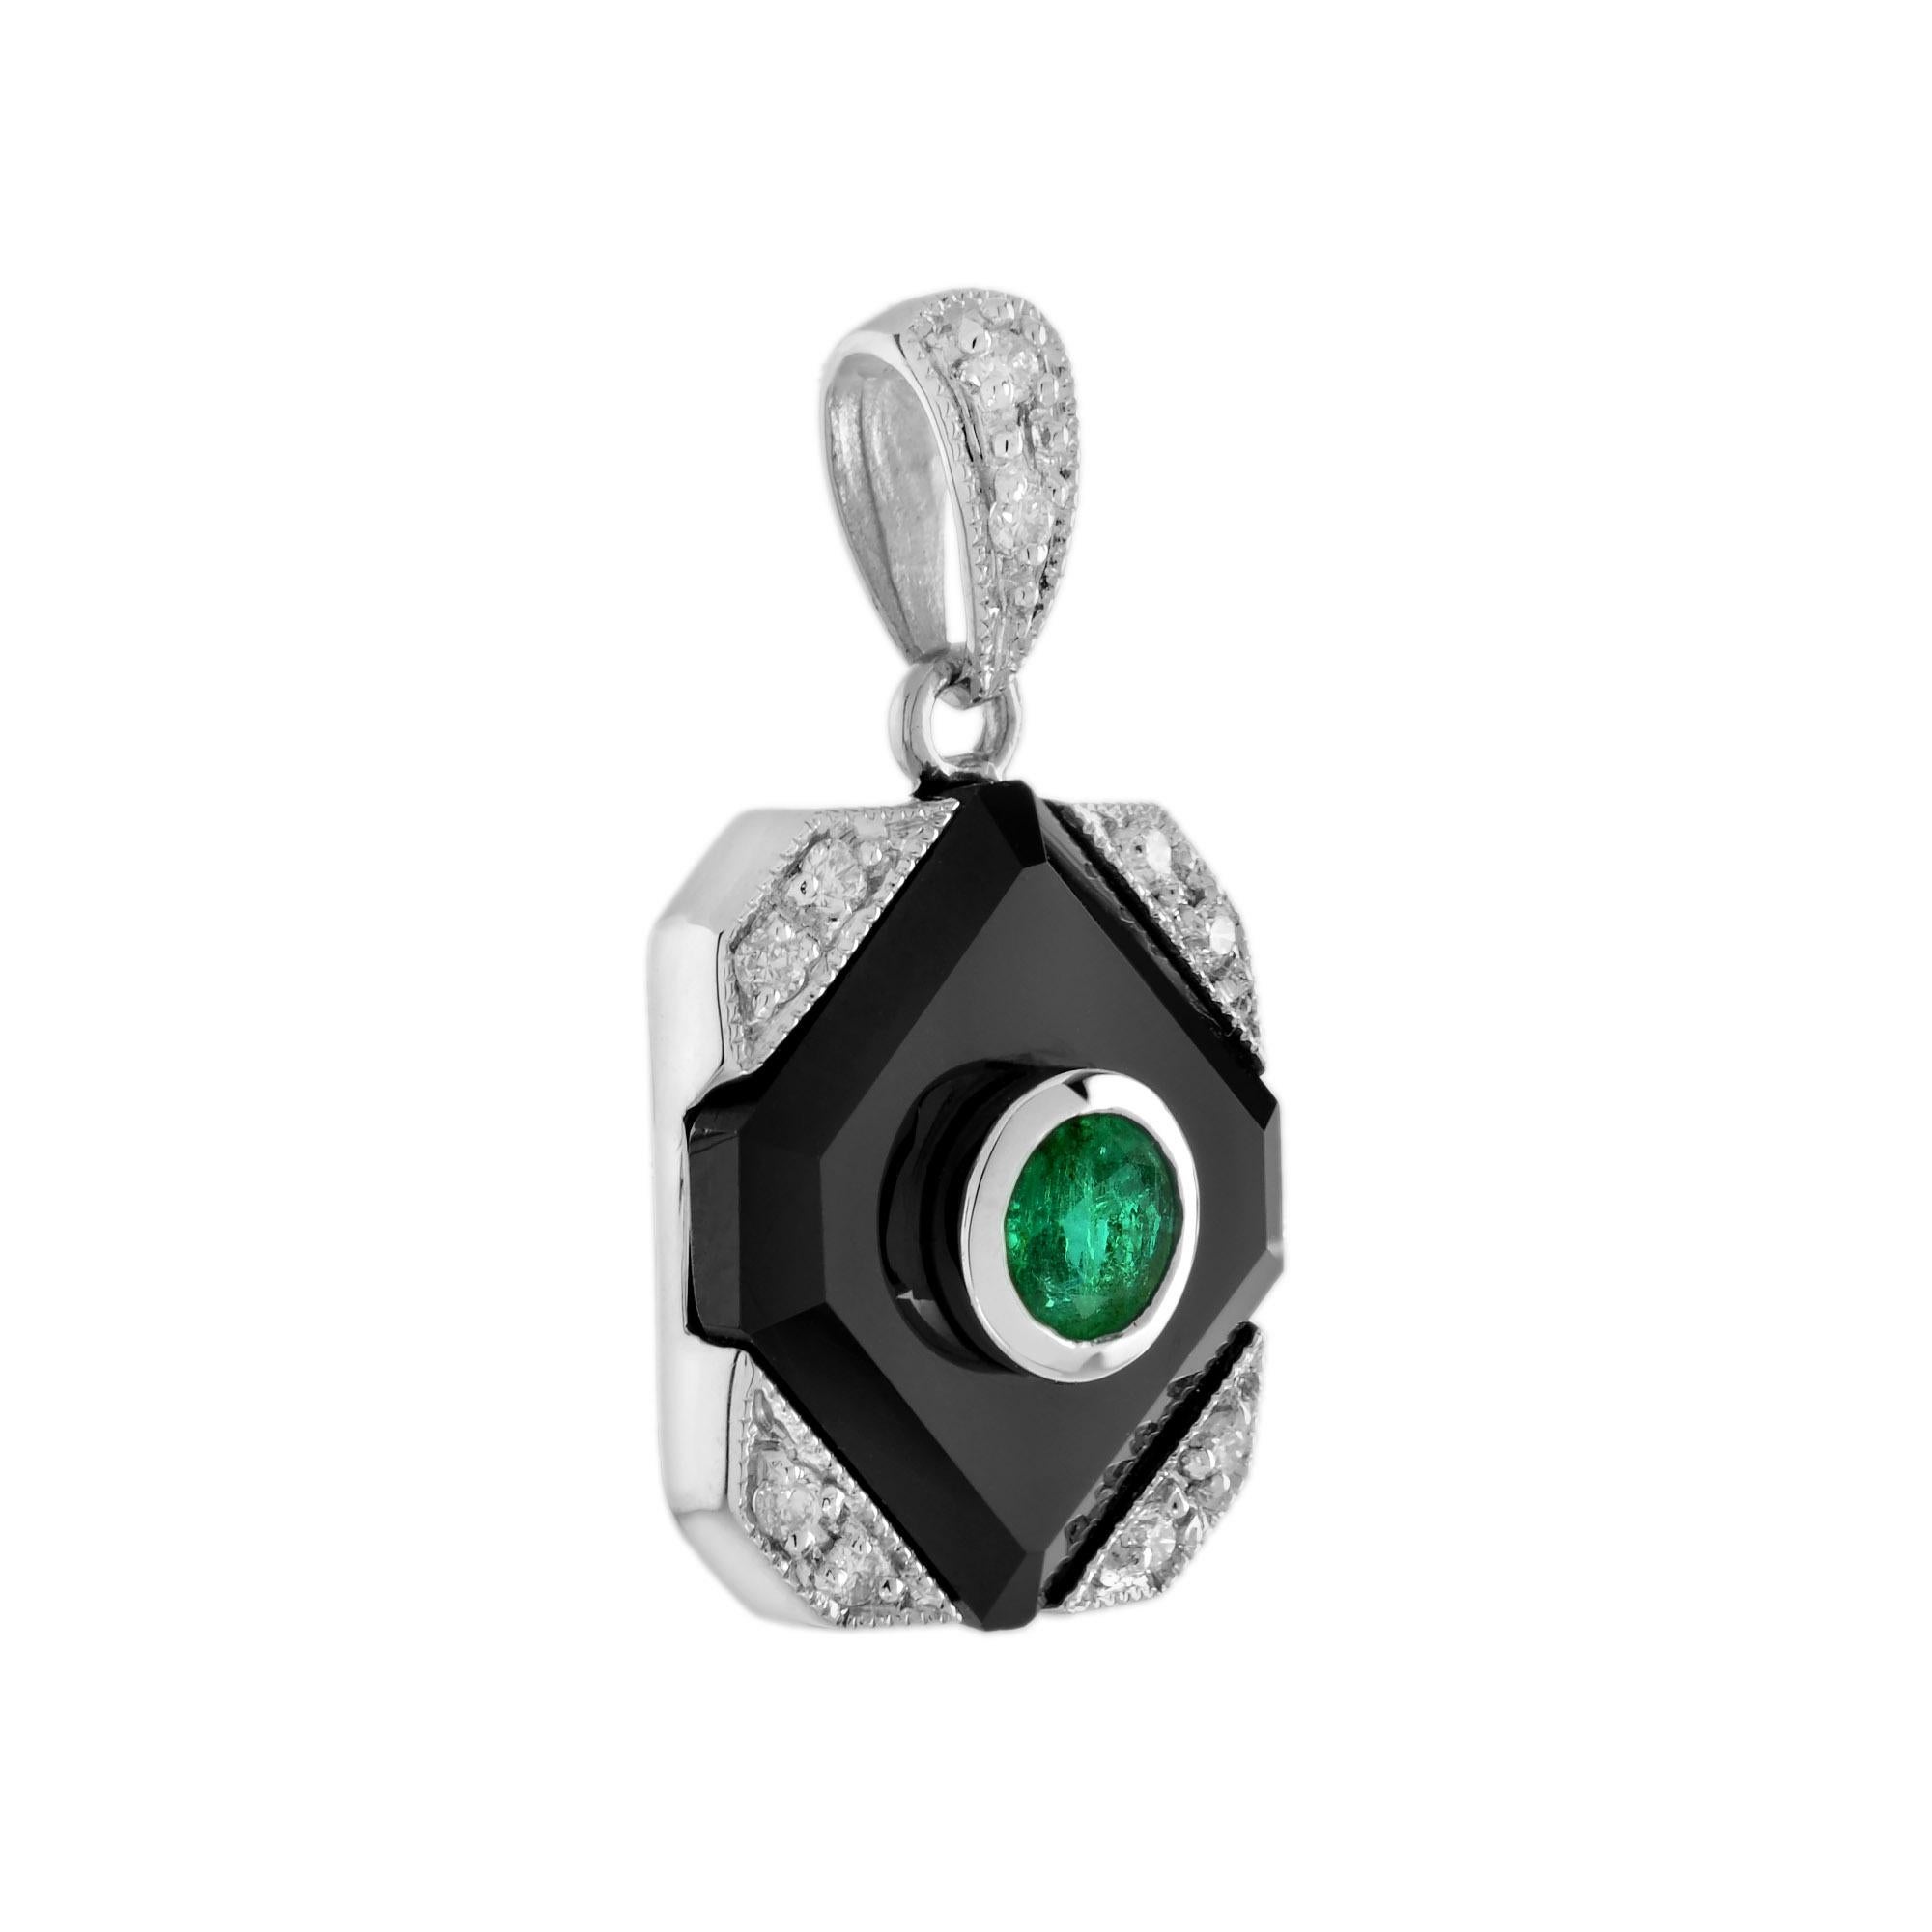 14k white gold Art Deco style emerald, onyx, and diamond pendant, centrally set with a round emerald with in an octagon shaped black onyx frame, surrounded by ten grain set diamonds totaling 0.09 carat. A fine piece jewelry you will cherish in your